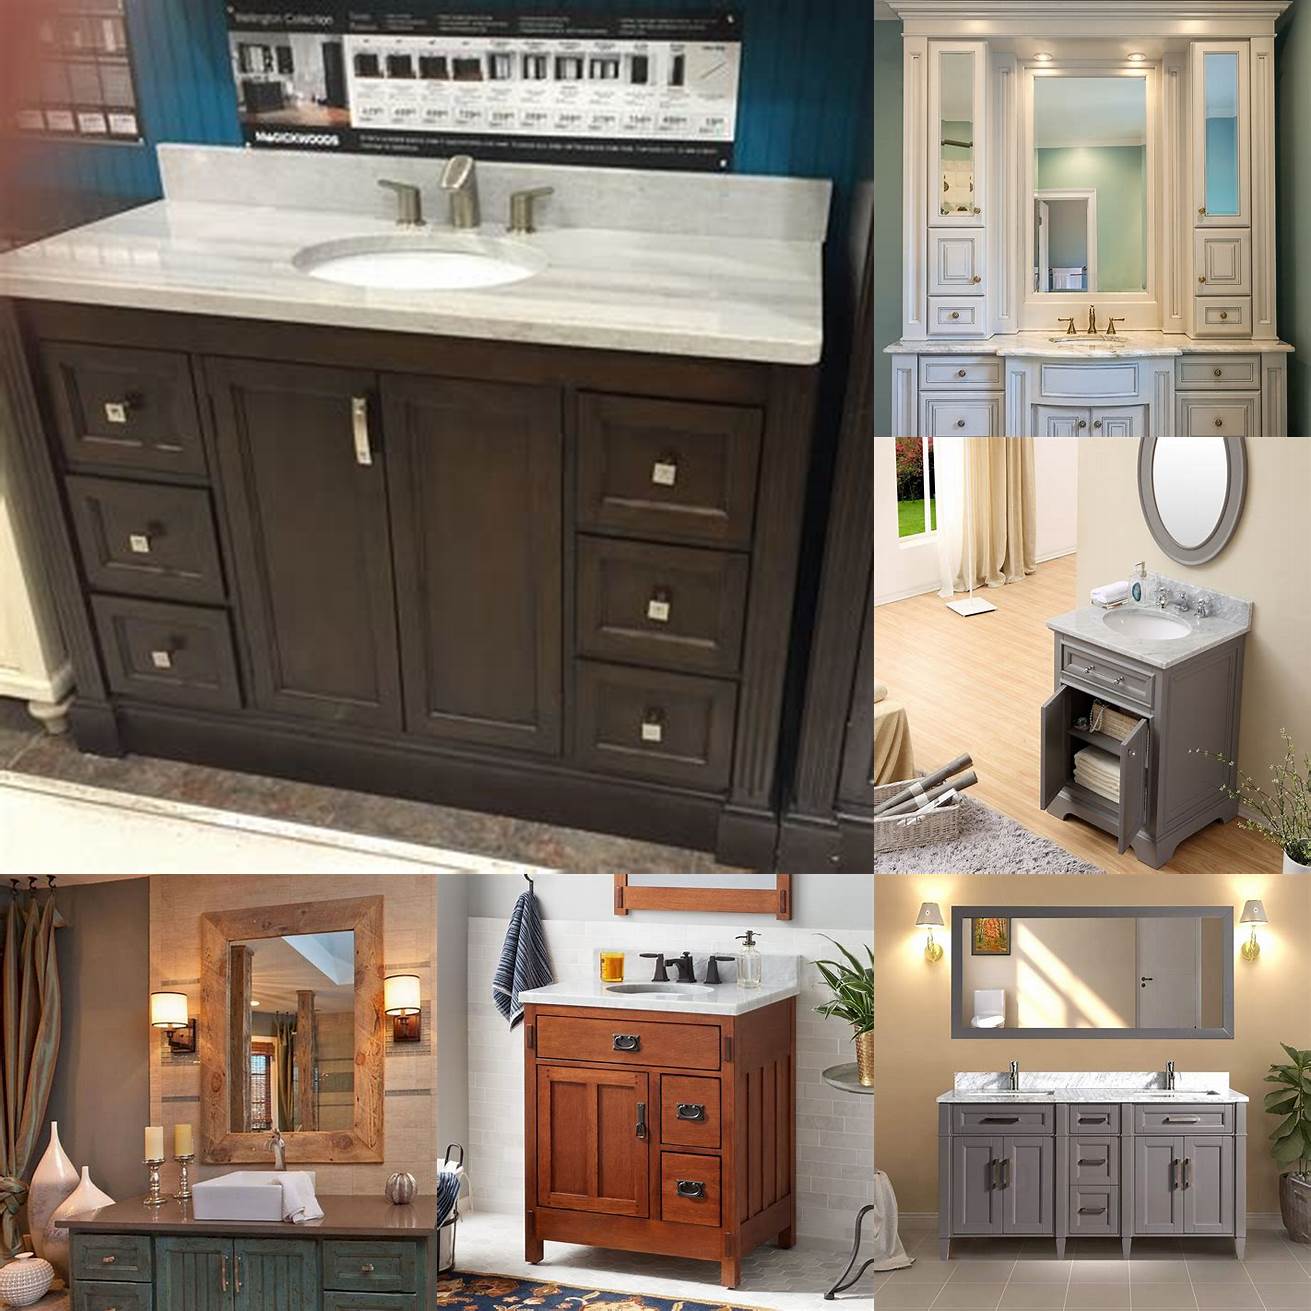 Stylish designs Menards vanities come in various styles and finishes to match your bathroom décor You can choose from modern traditional rustic or transitional designs